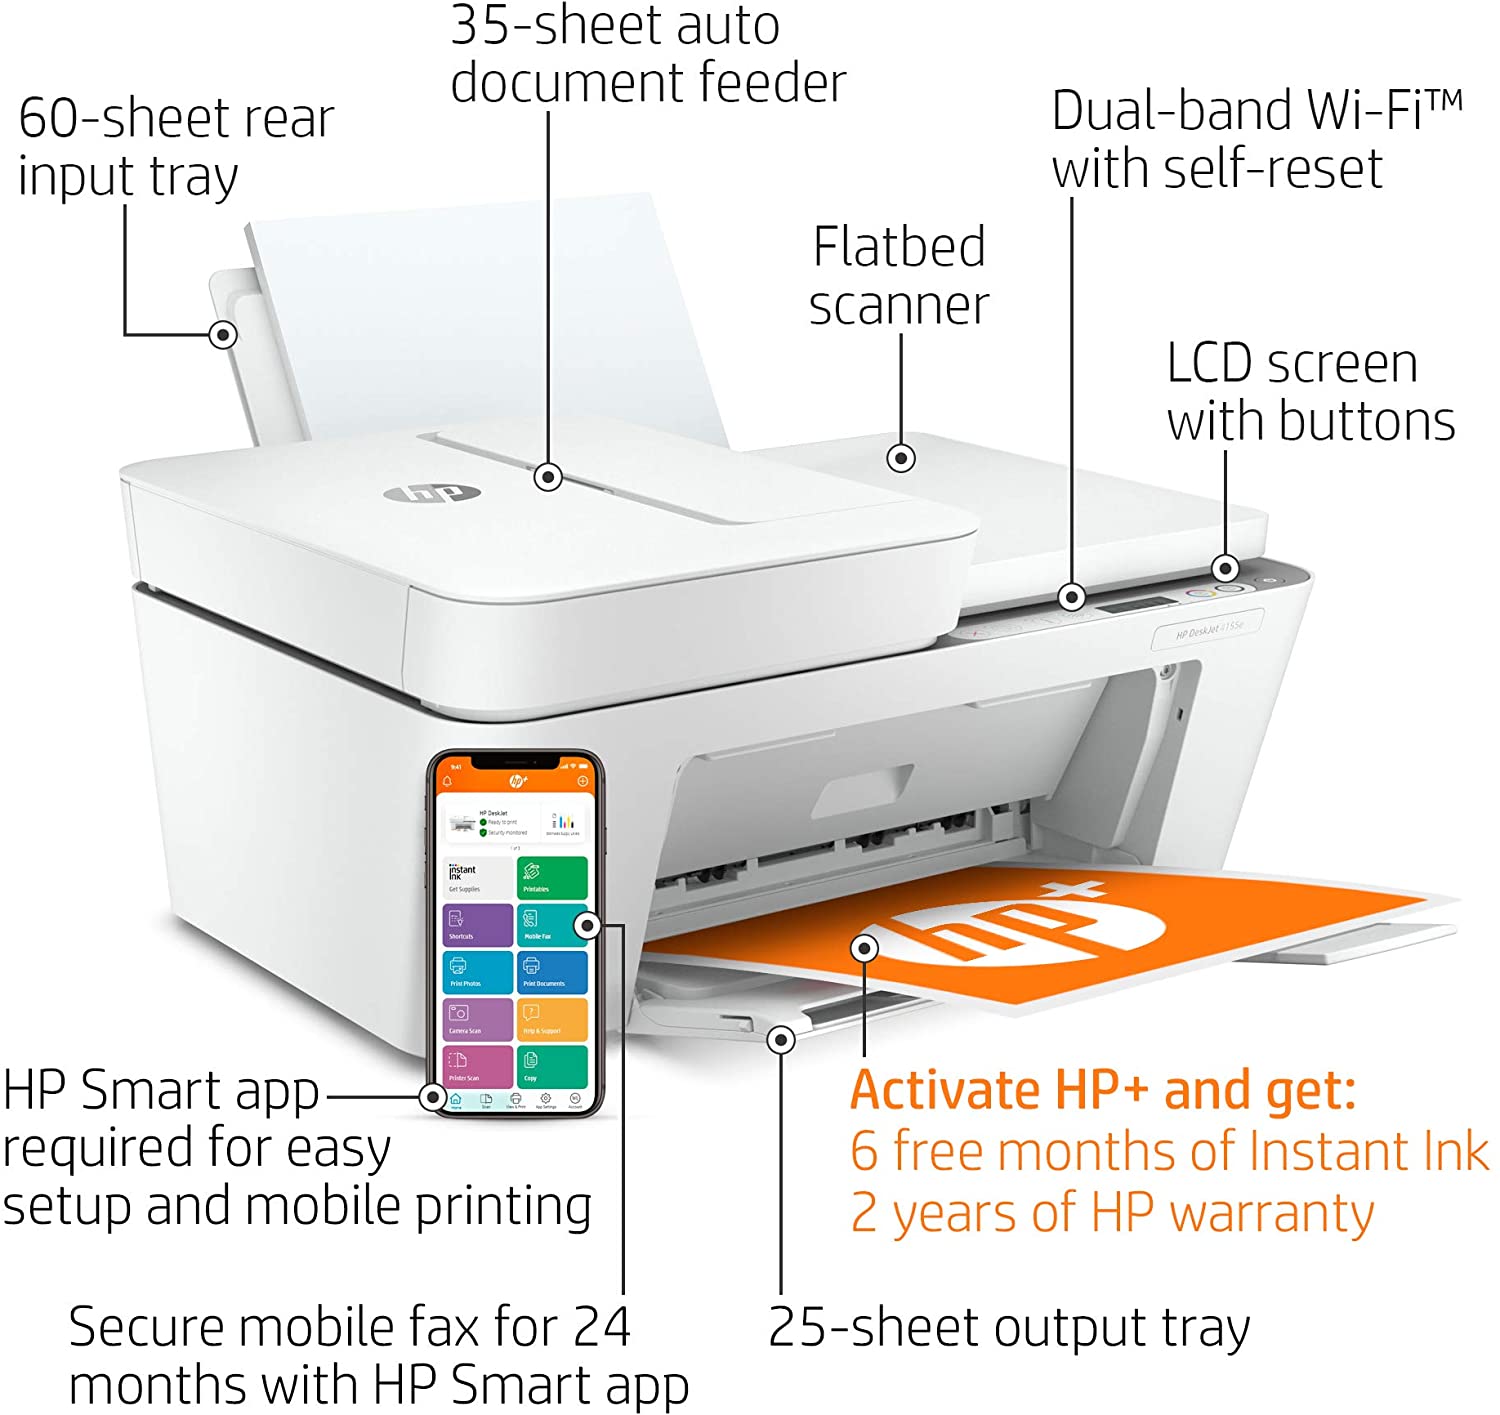 Review of HP DeskJet 4155e All-in-One Wireless Color Printer (26Q90A)